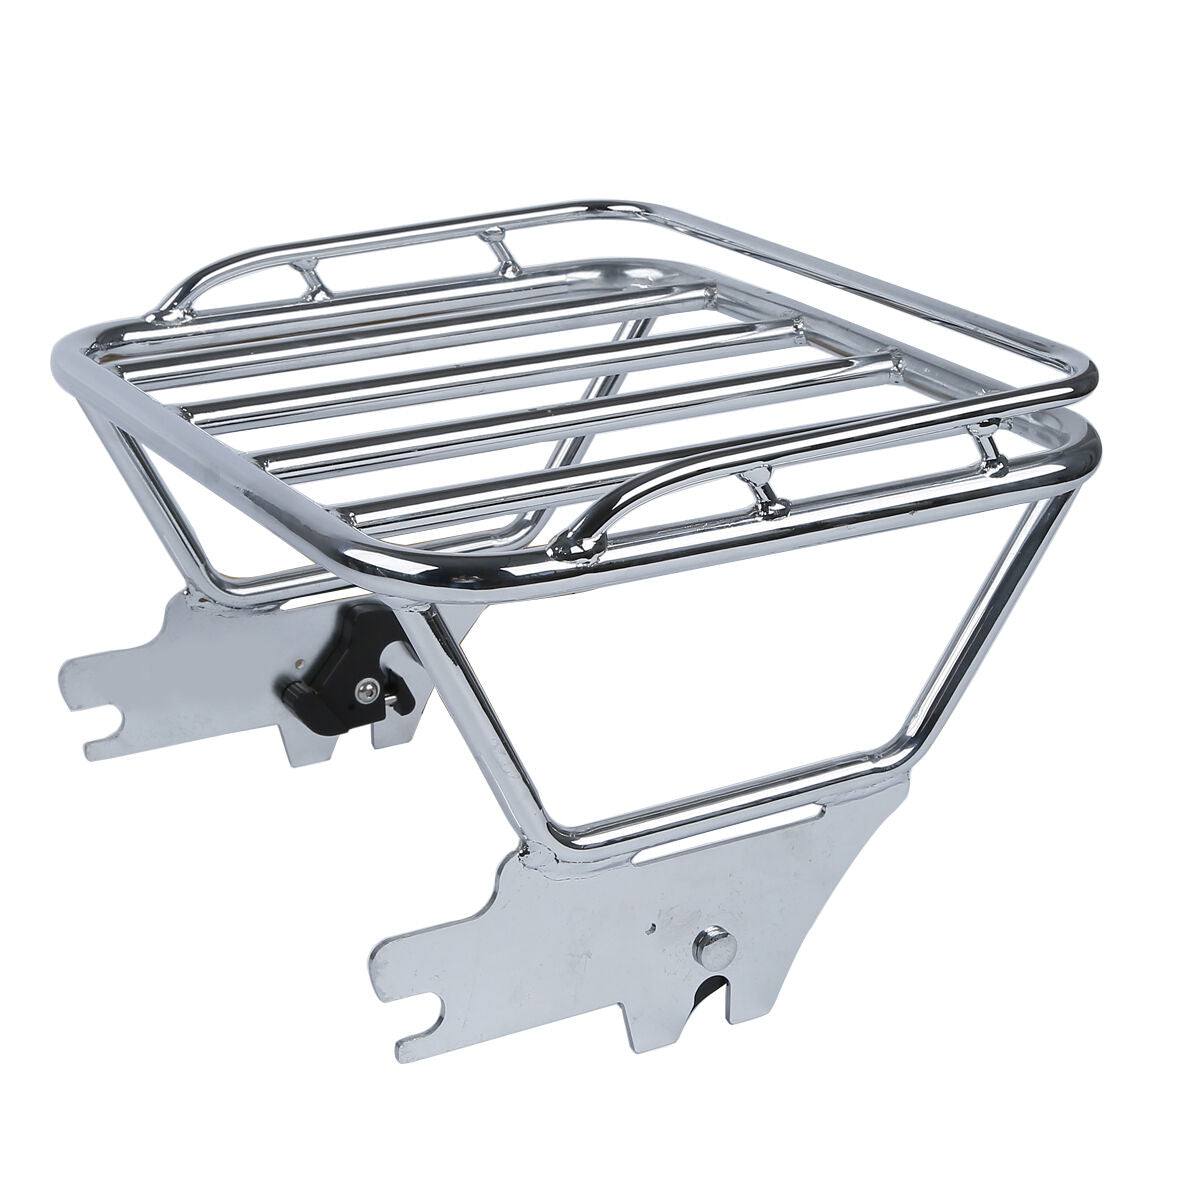 Detachable 2 Up Luggage Rack Fit For Harley Touring Electra Road Glide 1997-2008 - Moto Life Products